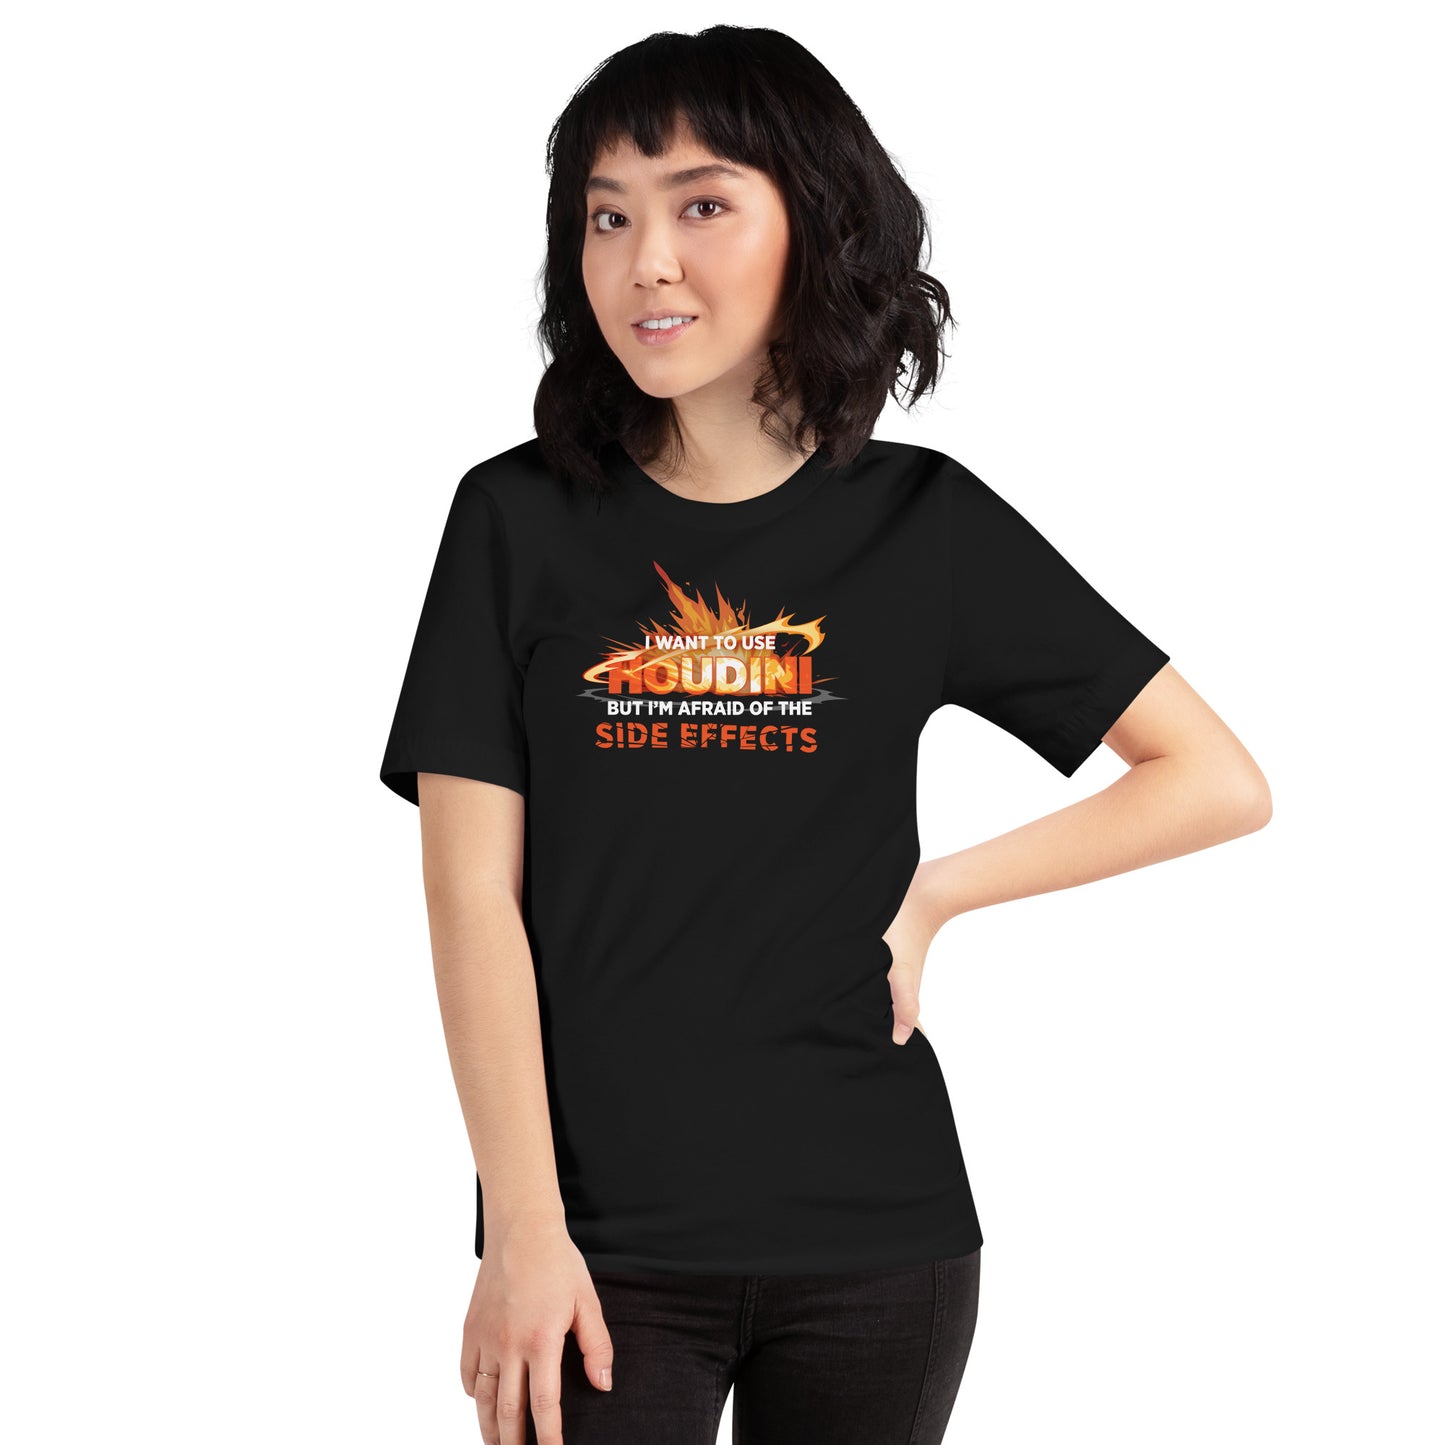 I Want to Use Houdini, But I'm Afraid of the Side Effects T-Shirt